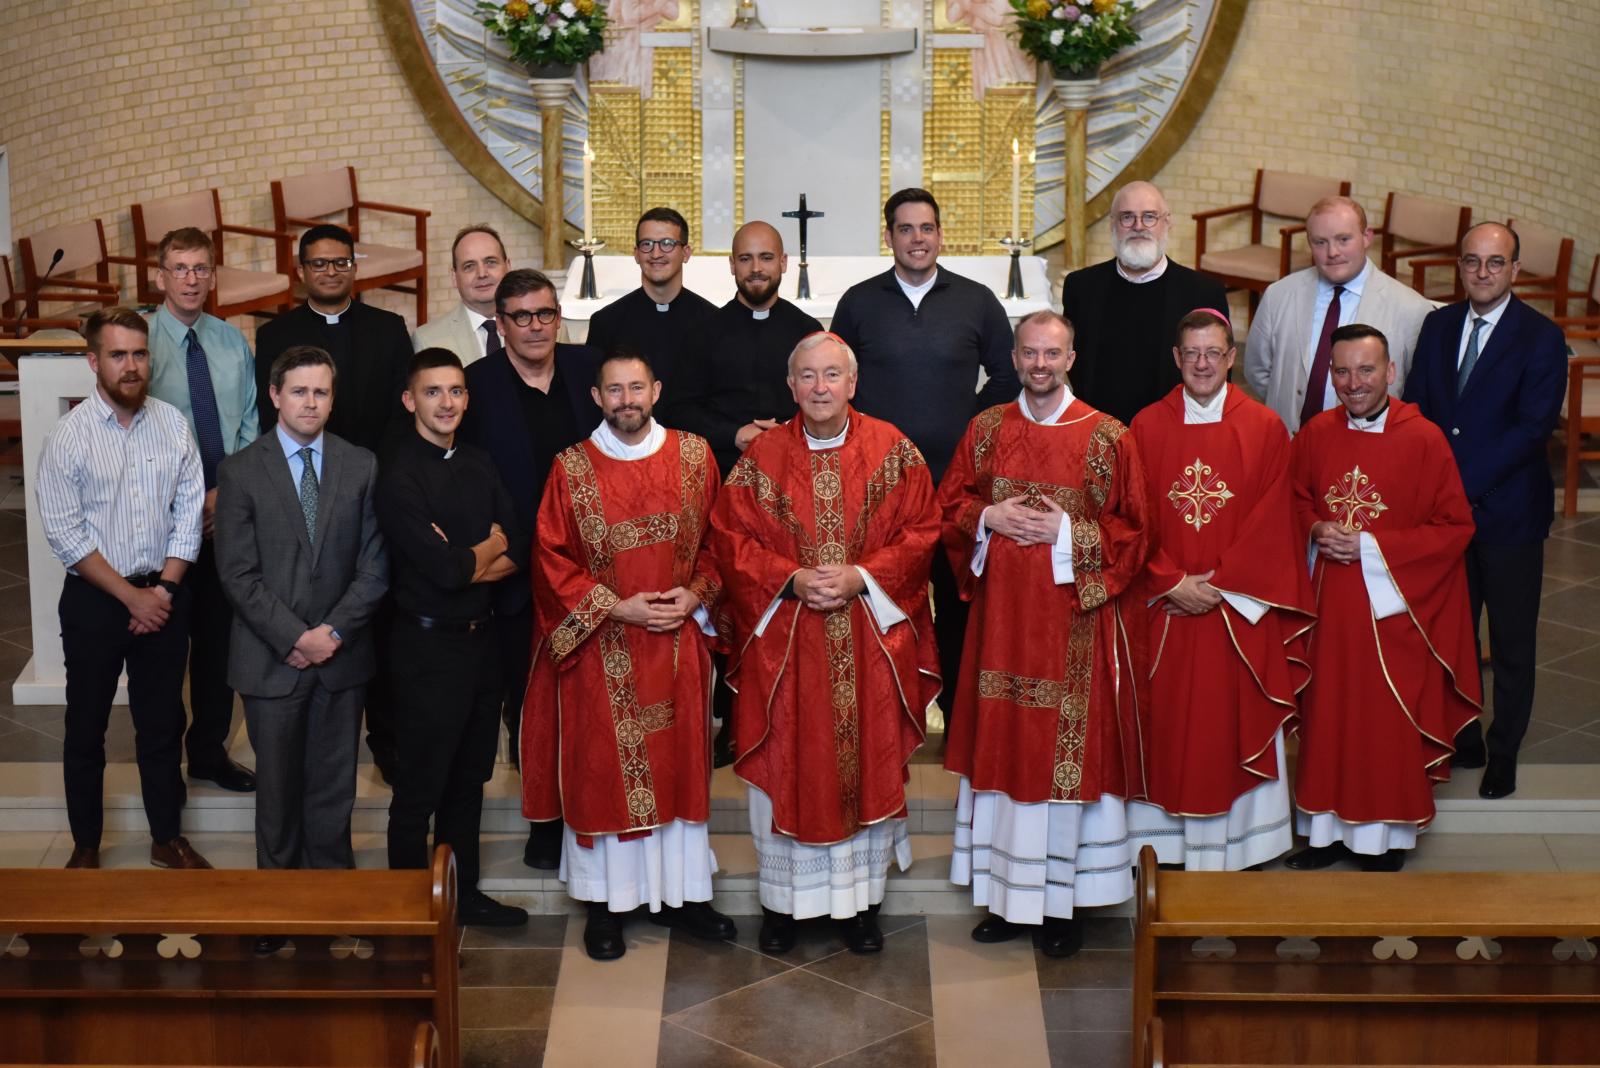 Westminster seminarians mark the start of the new academic year